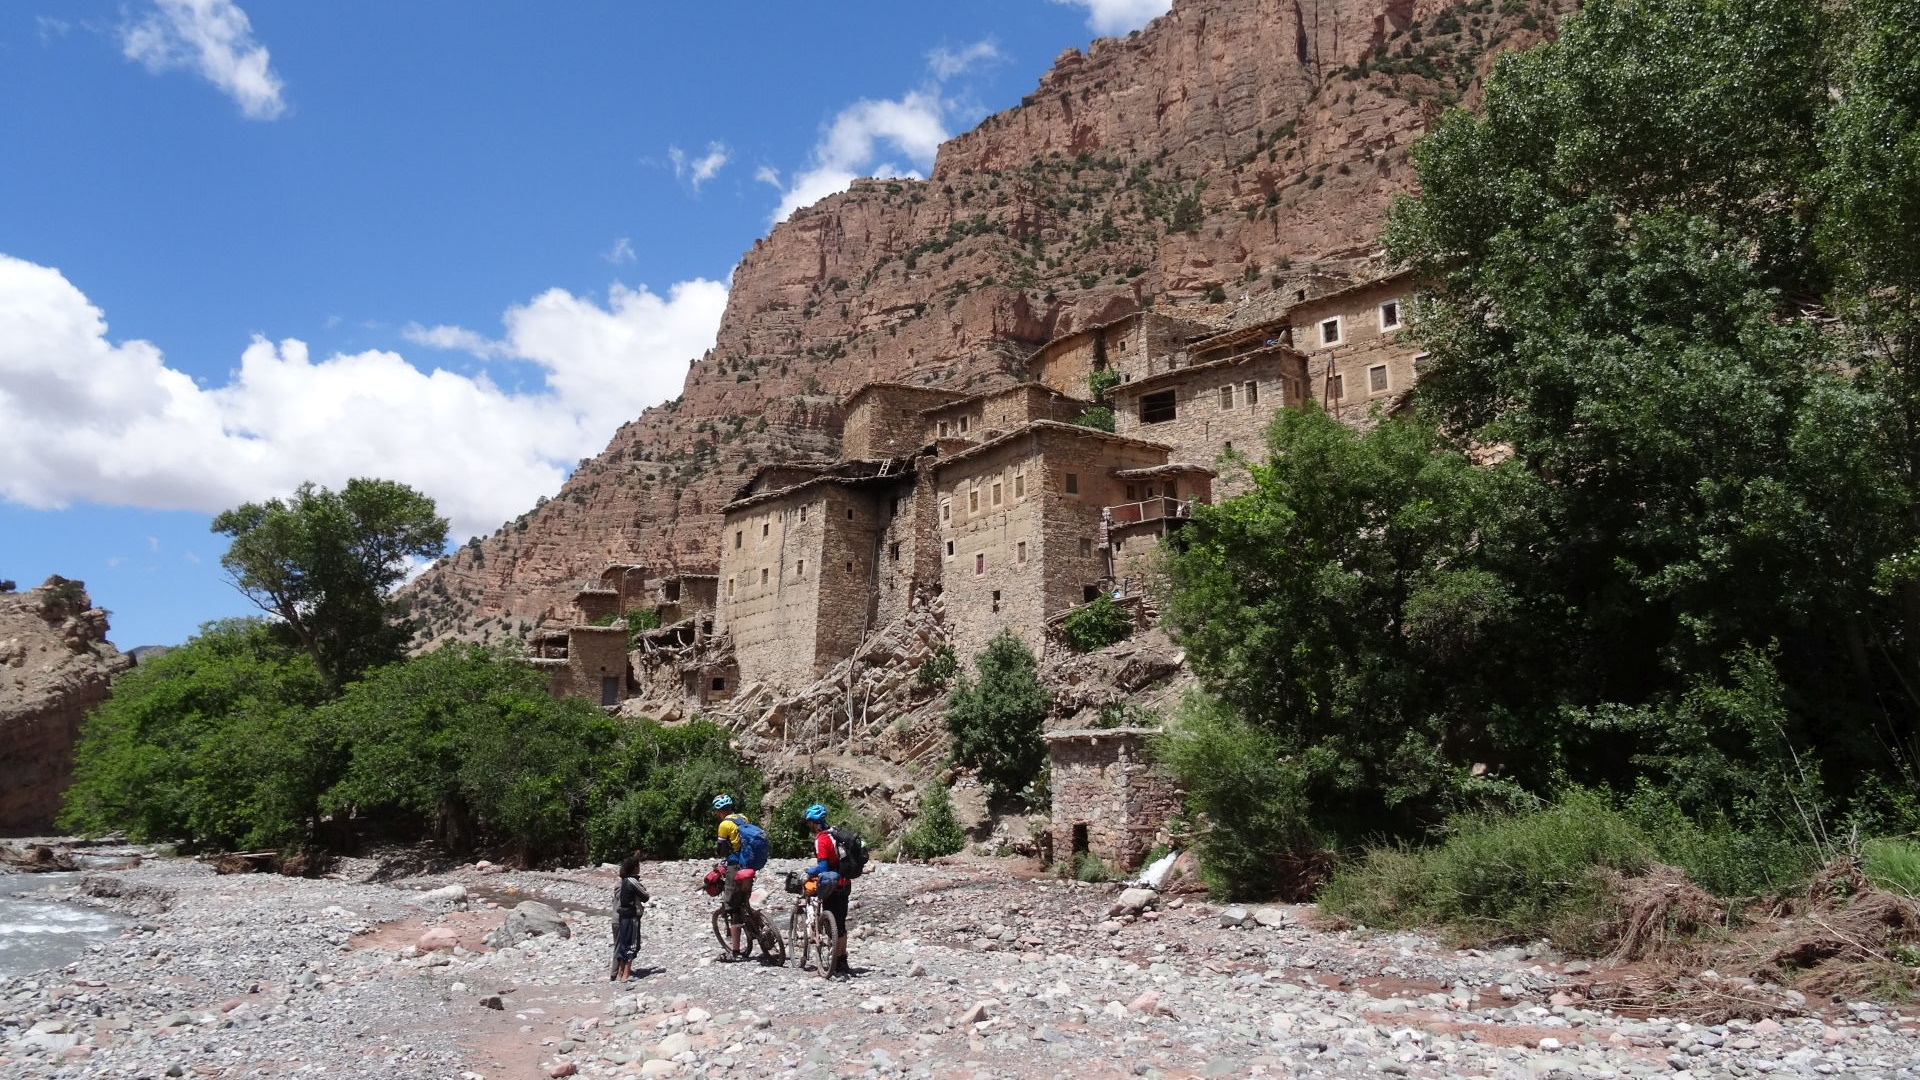 The remote Tassaout valley, only reachable on foot (or by bike!), at the ancient village of Fakhour. Taken on "Day 2" of our 2-week, unsupported traverse of the High Atlas in 2015 . © Steve Woodward